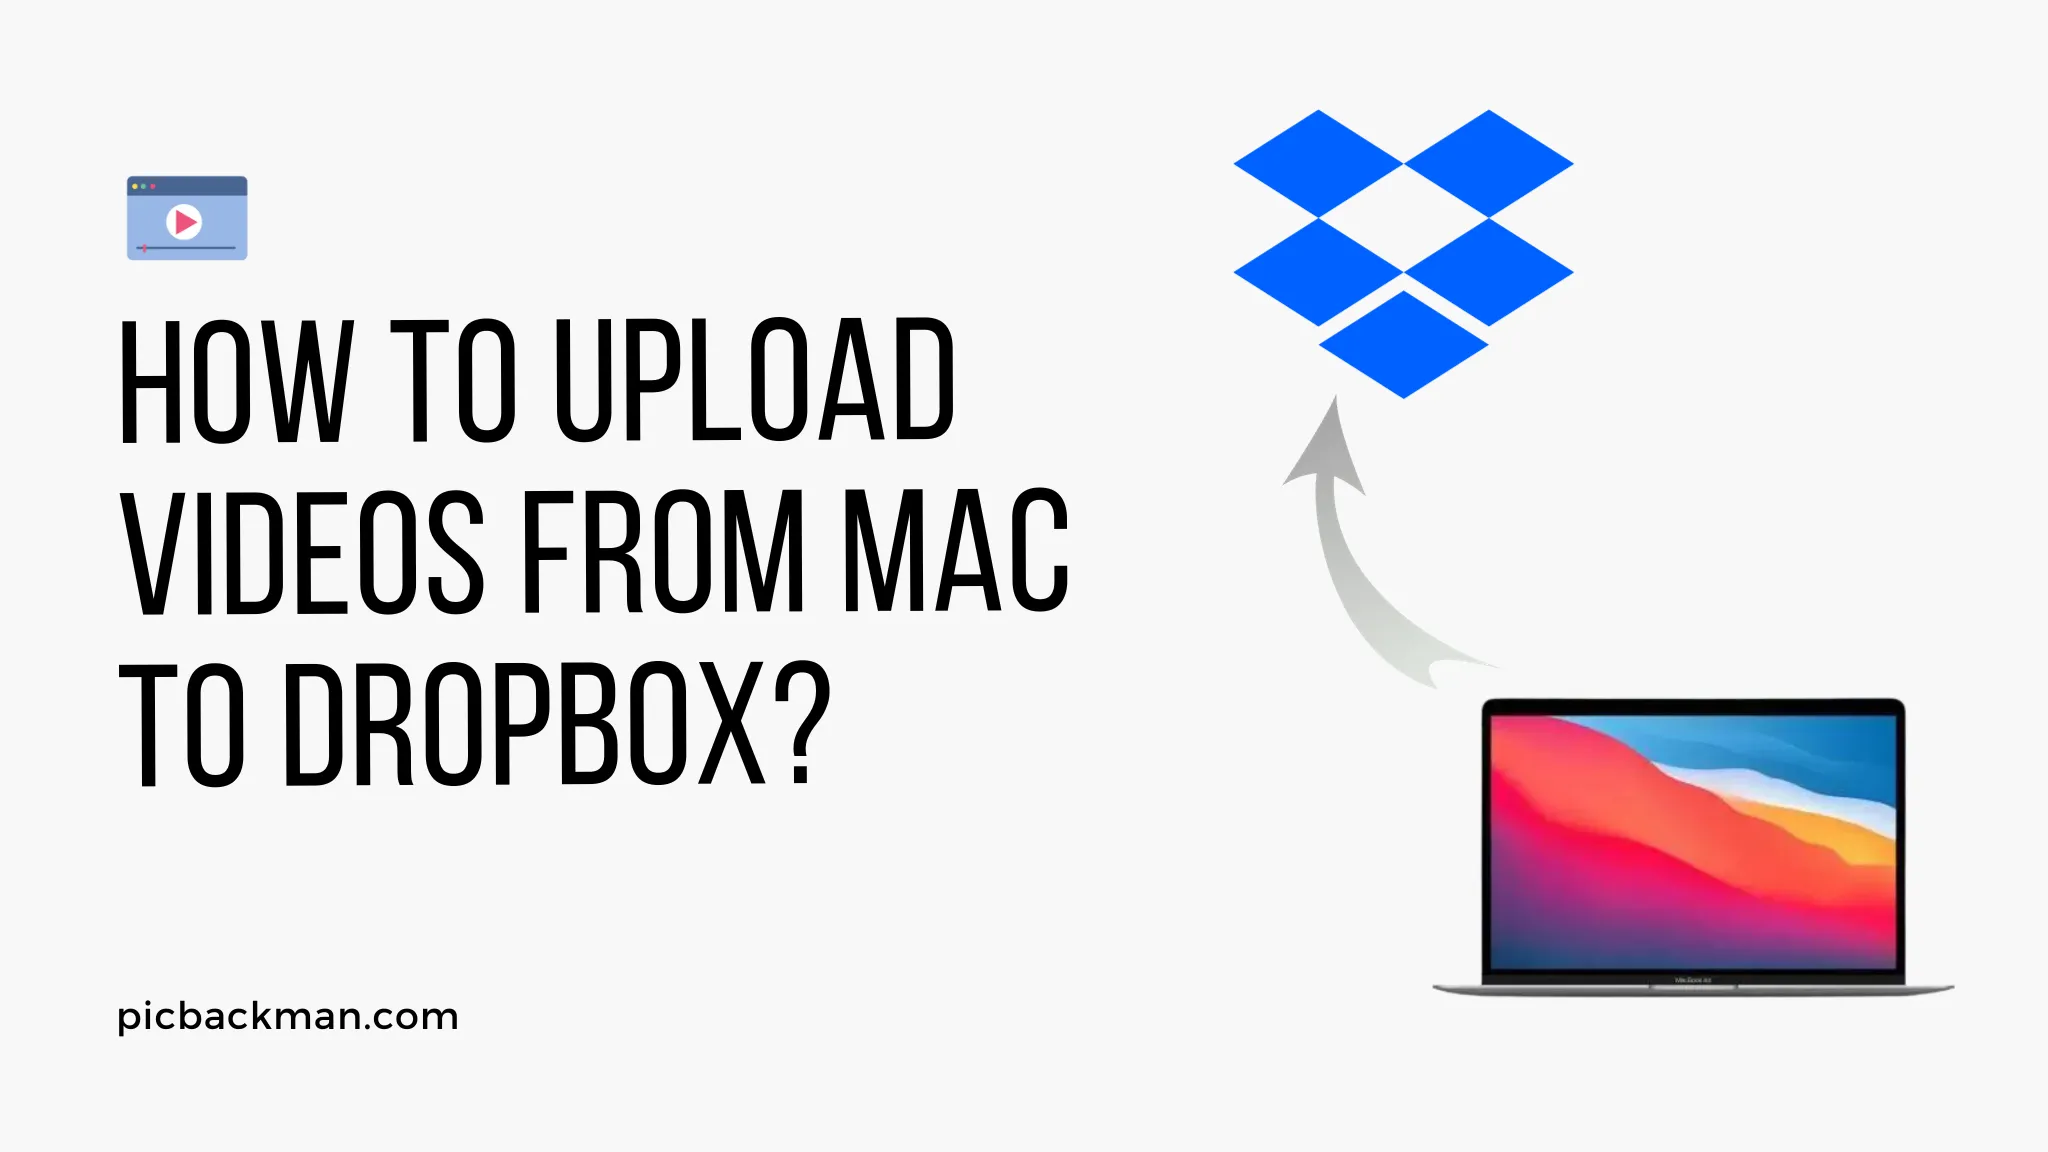 How to Upload Videos from Mac to Dropbox?